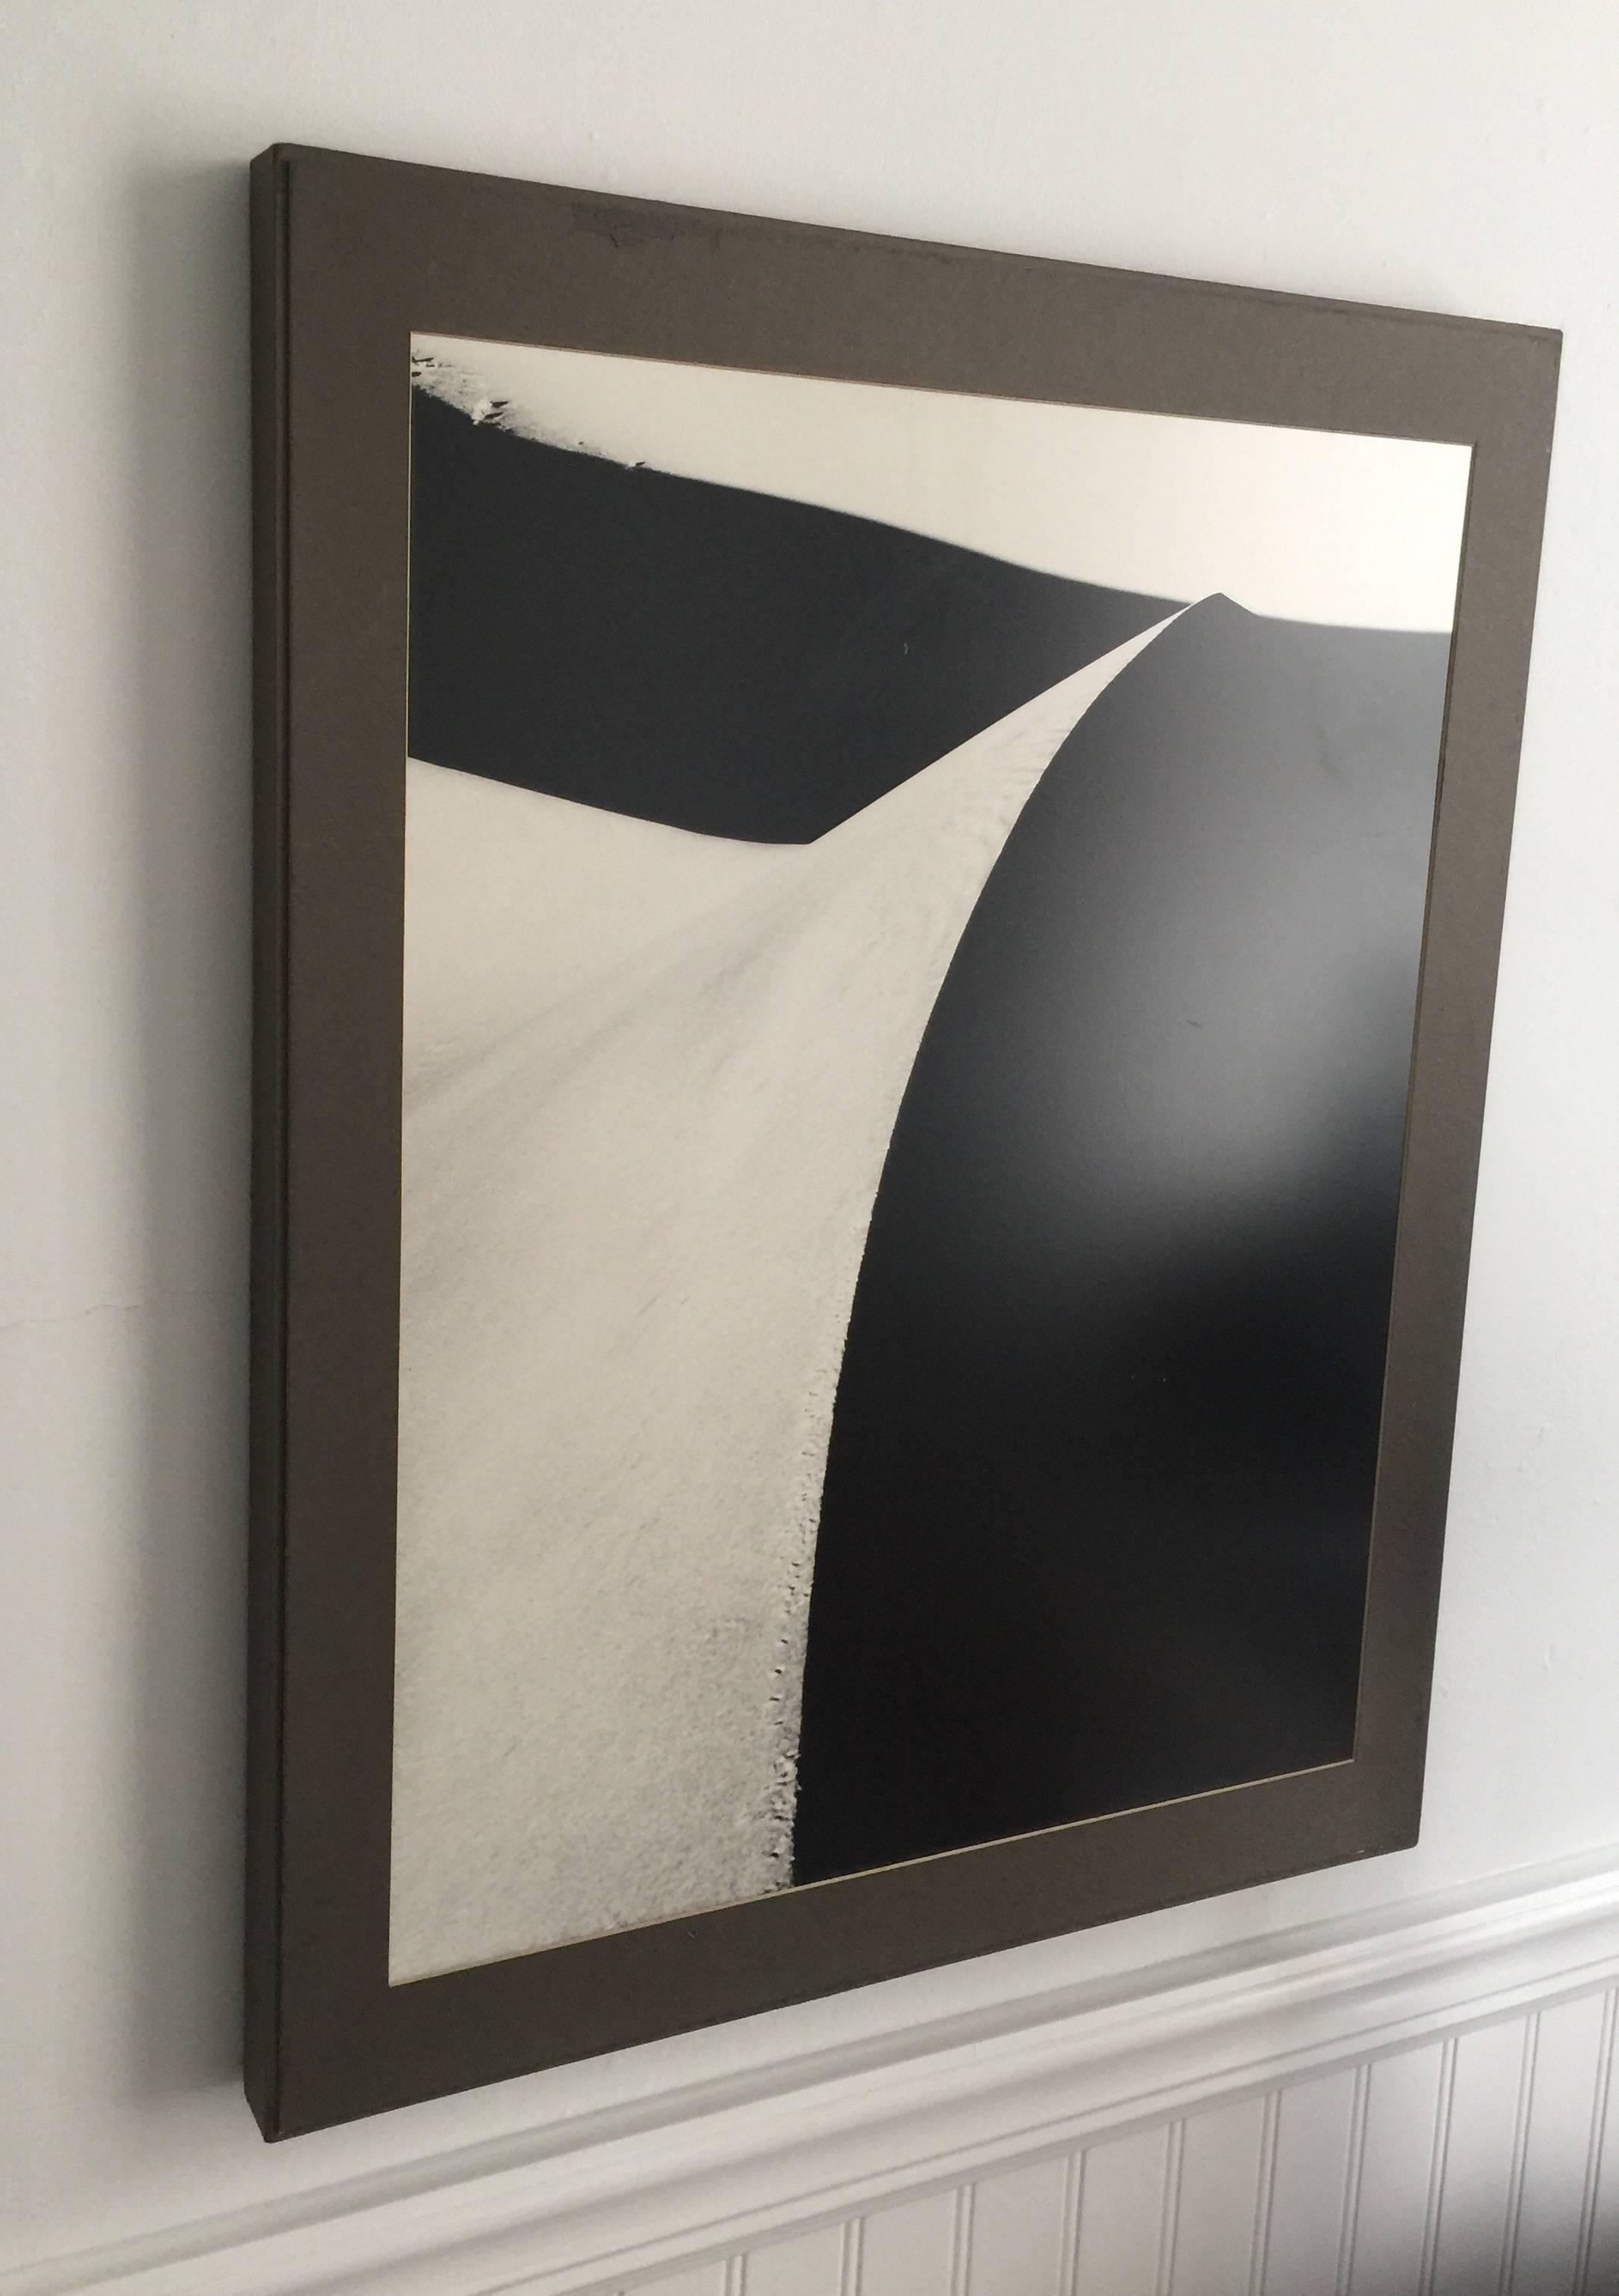 Original photograph by Yoshikazu Shirakawa. Death Valley group, 1975. Printed in Japan. Artist stamp/handwriting on verso. Matted/mounted on wood. Overall dimensions: 16 inches W x 20 inches H.